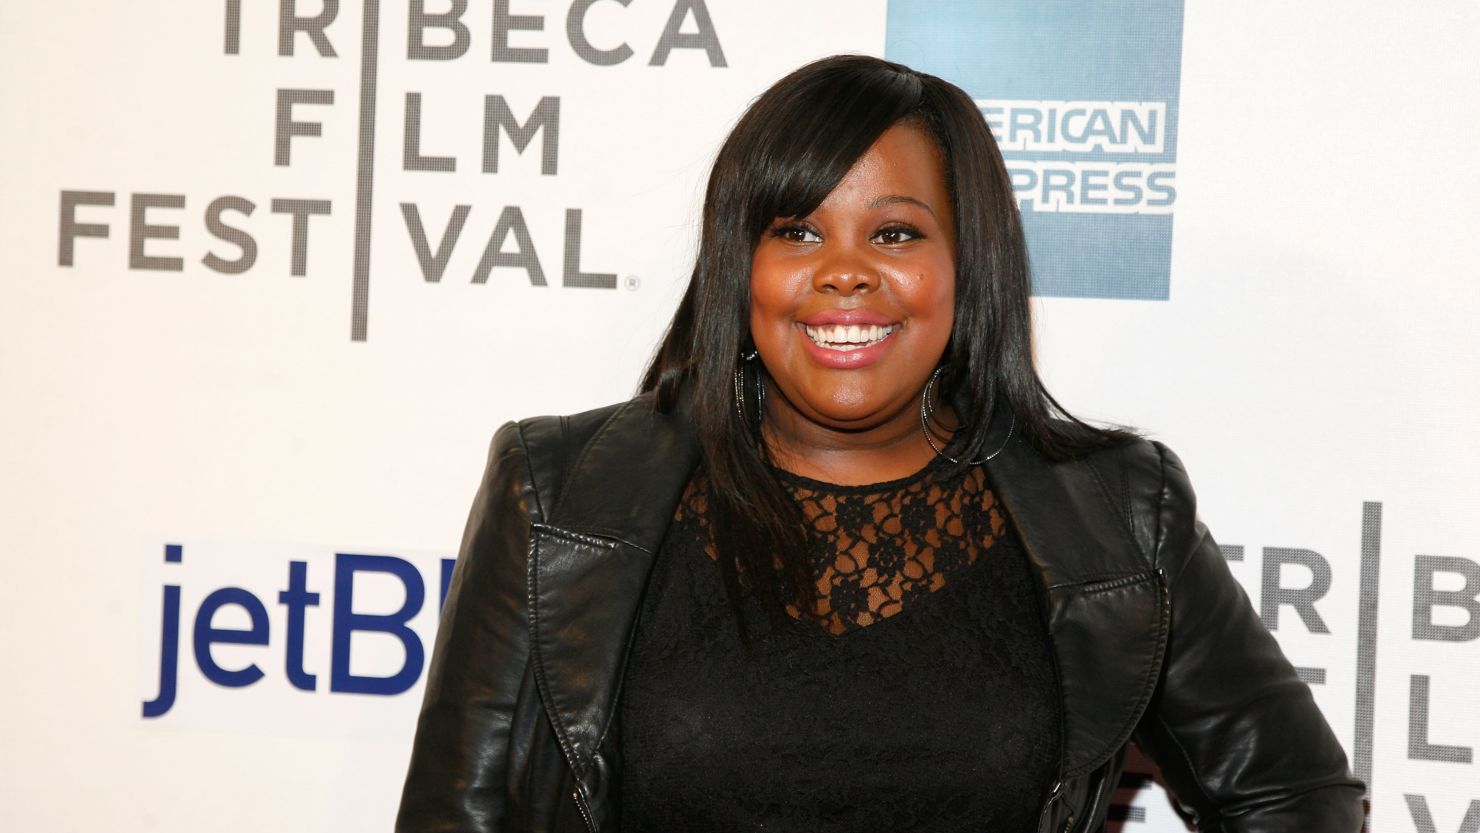 Amber Riley attends "Struck By Lightning" premiere during the 2012 Tribeca Film Festival in April.